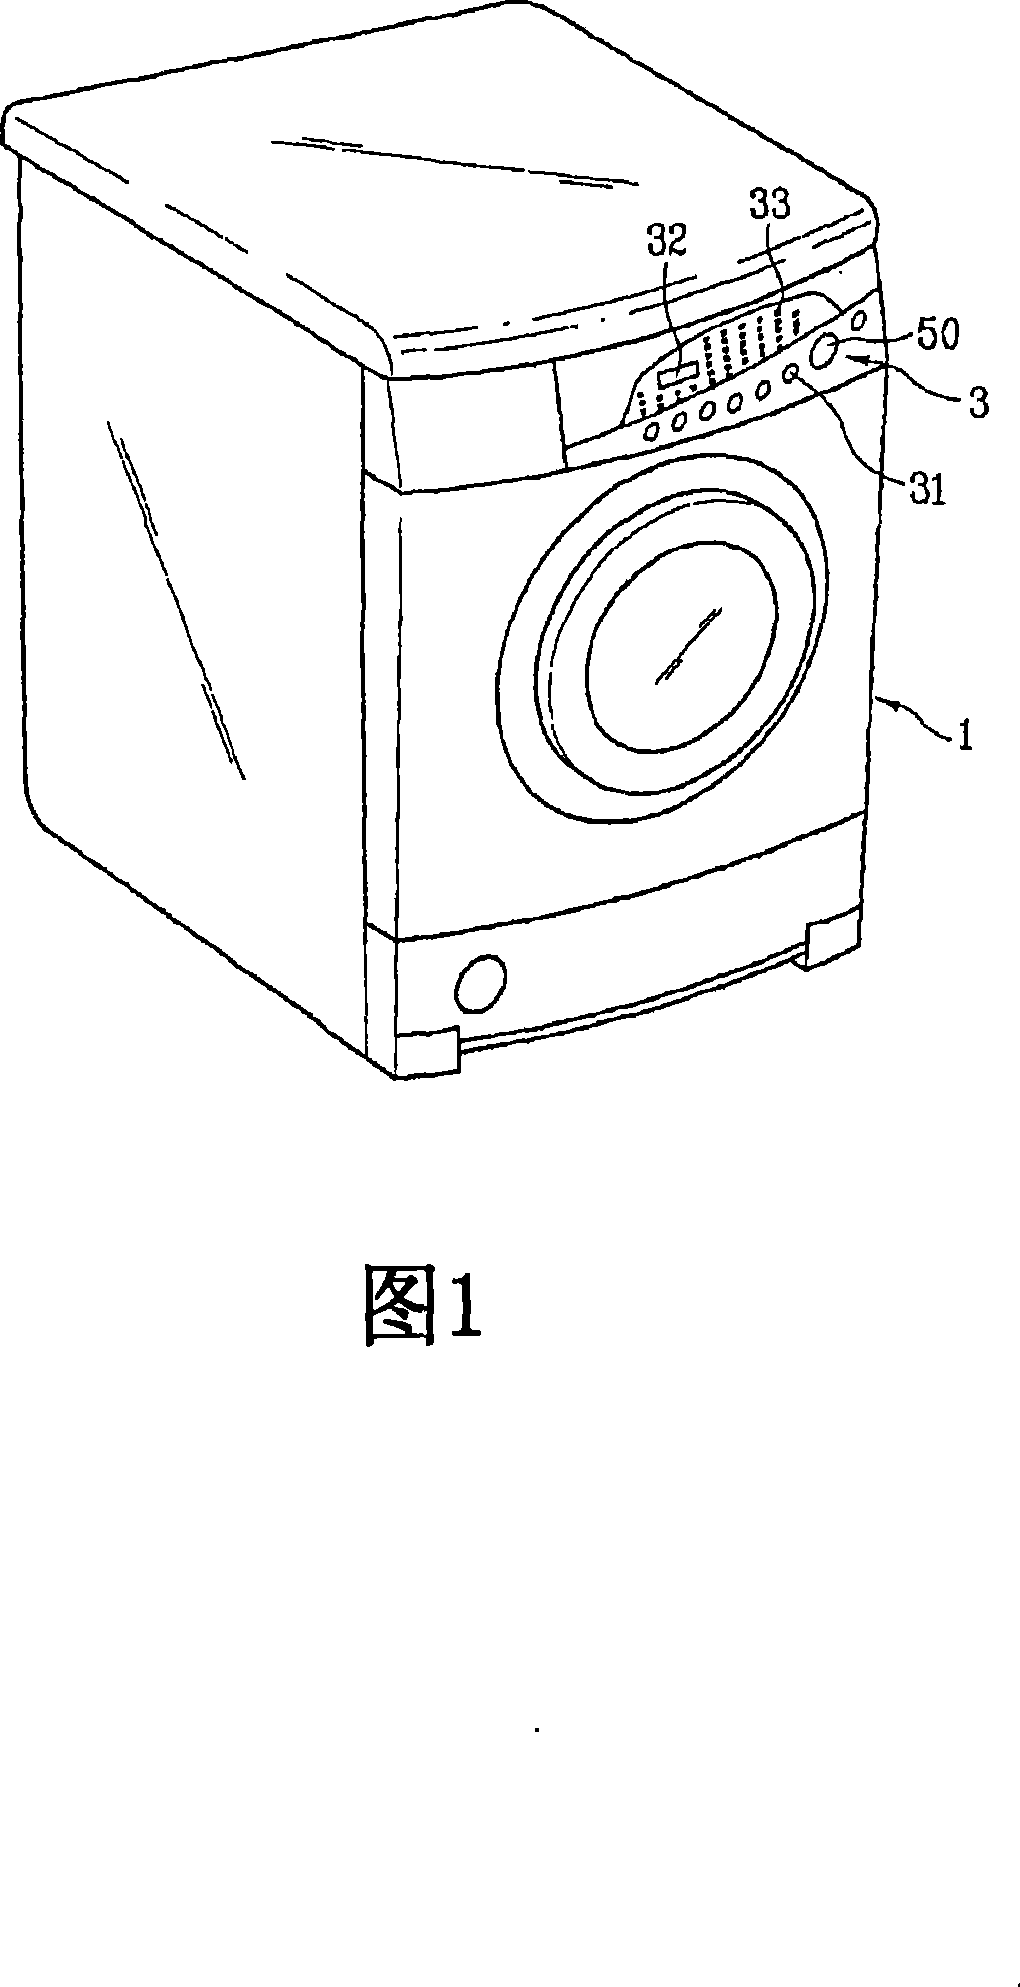 Washing or drying machine having position changeable controller